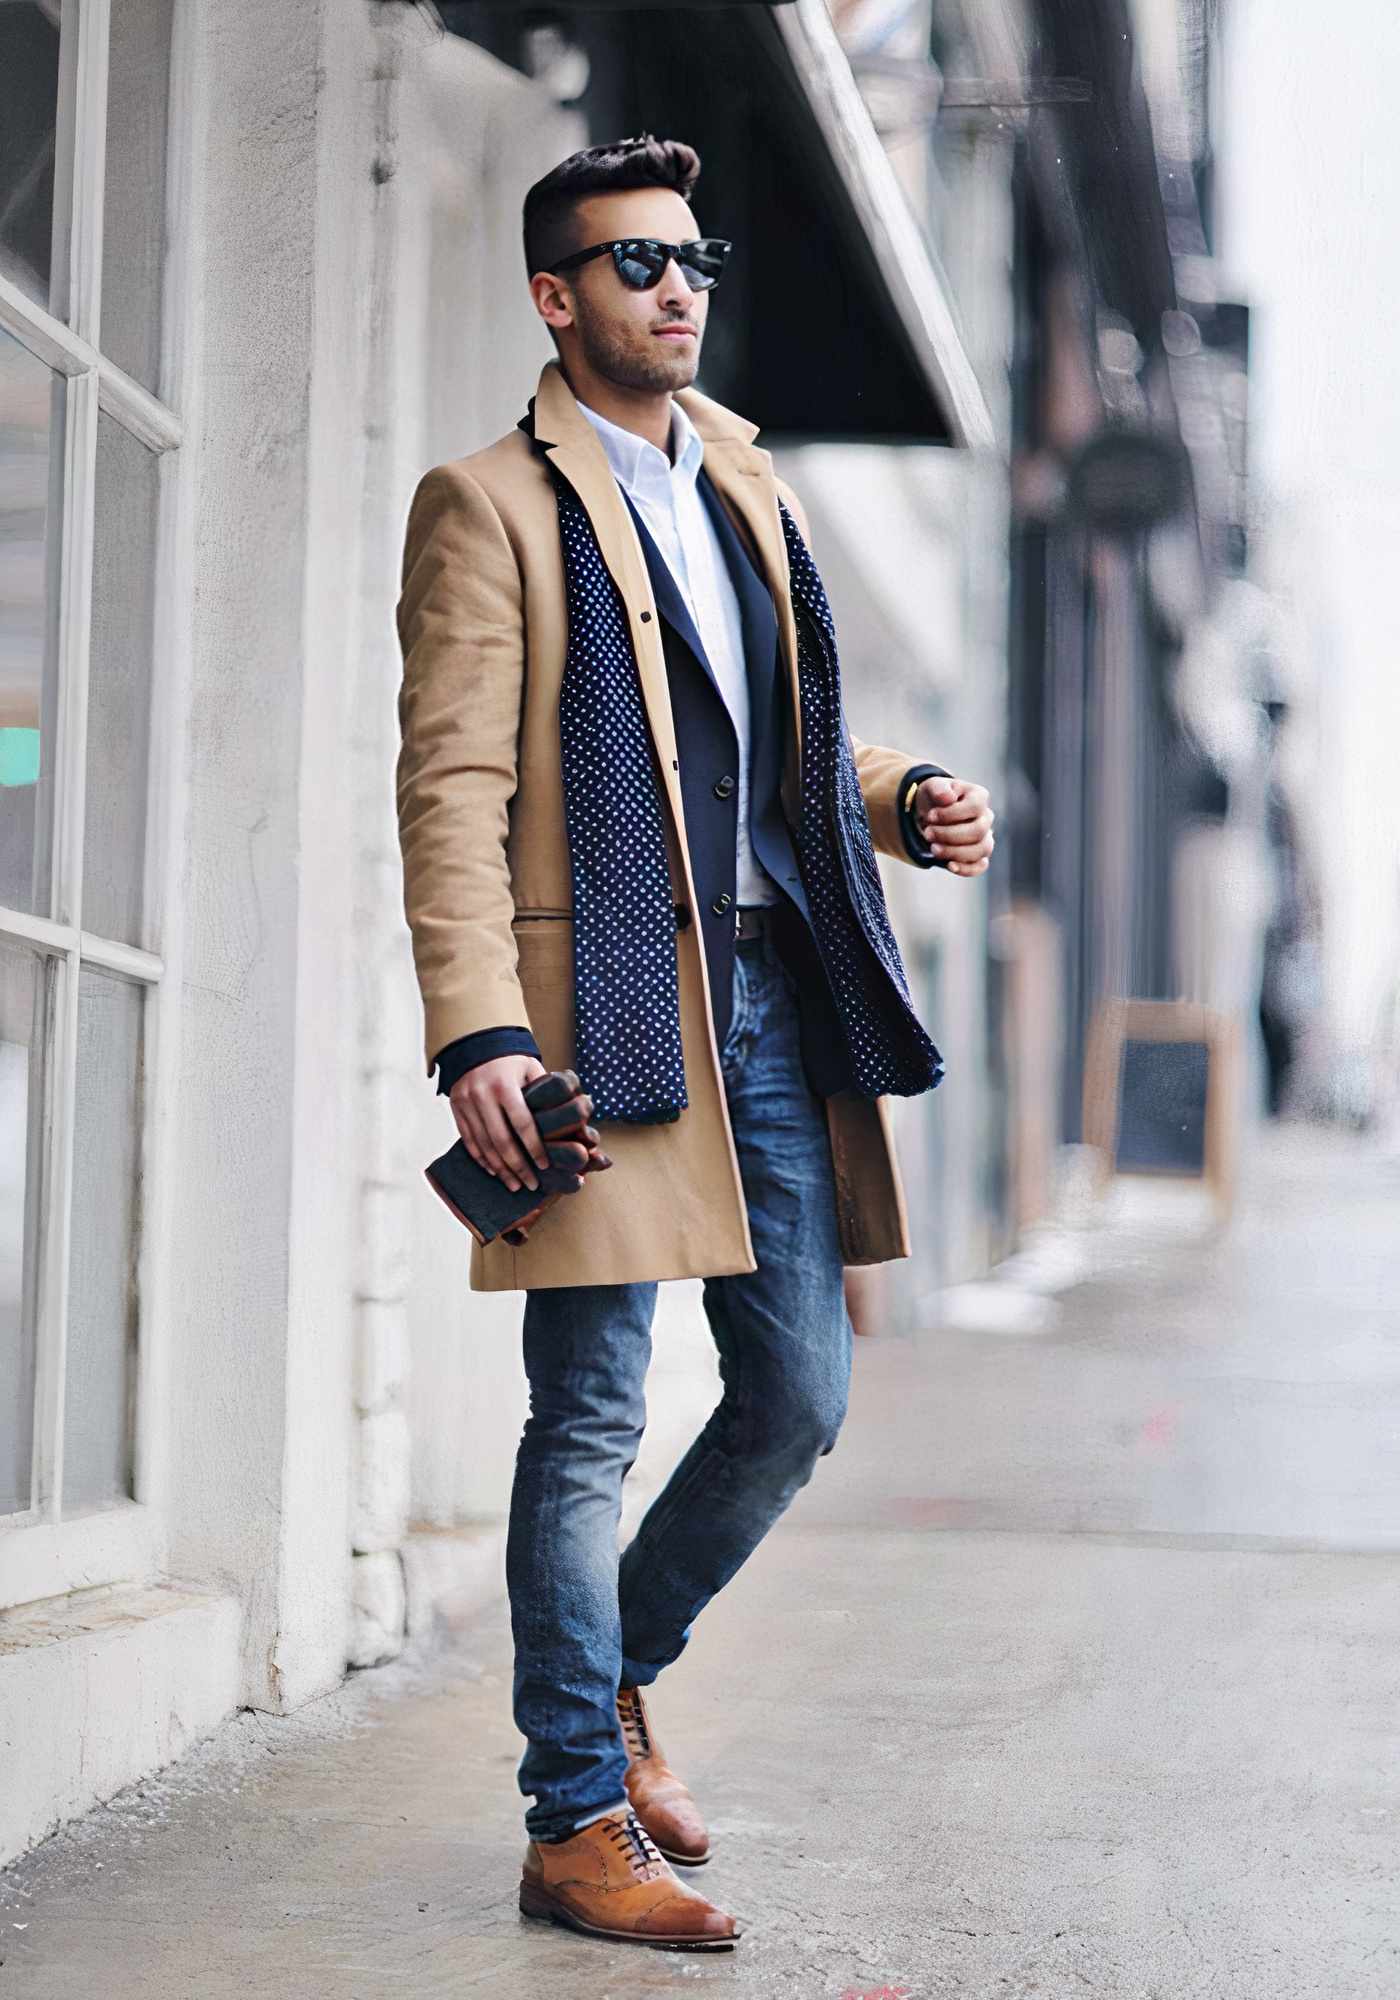 Tan coat over a navy suit jacket, blue jeans, scarf, and gloves